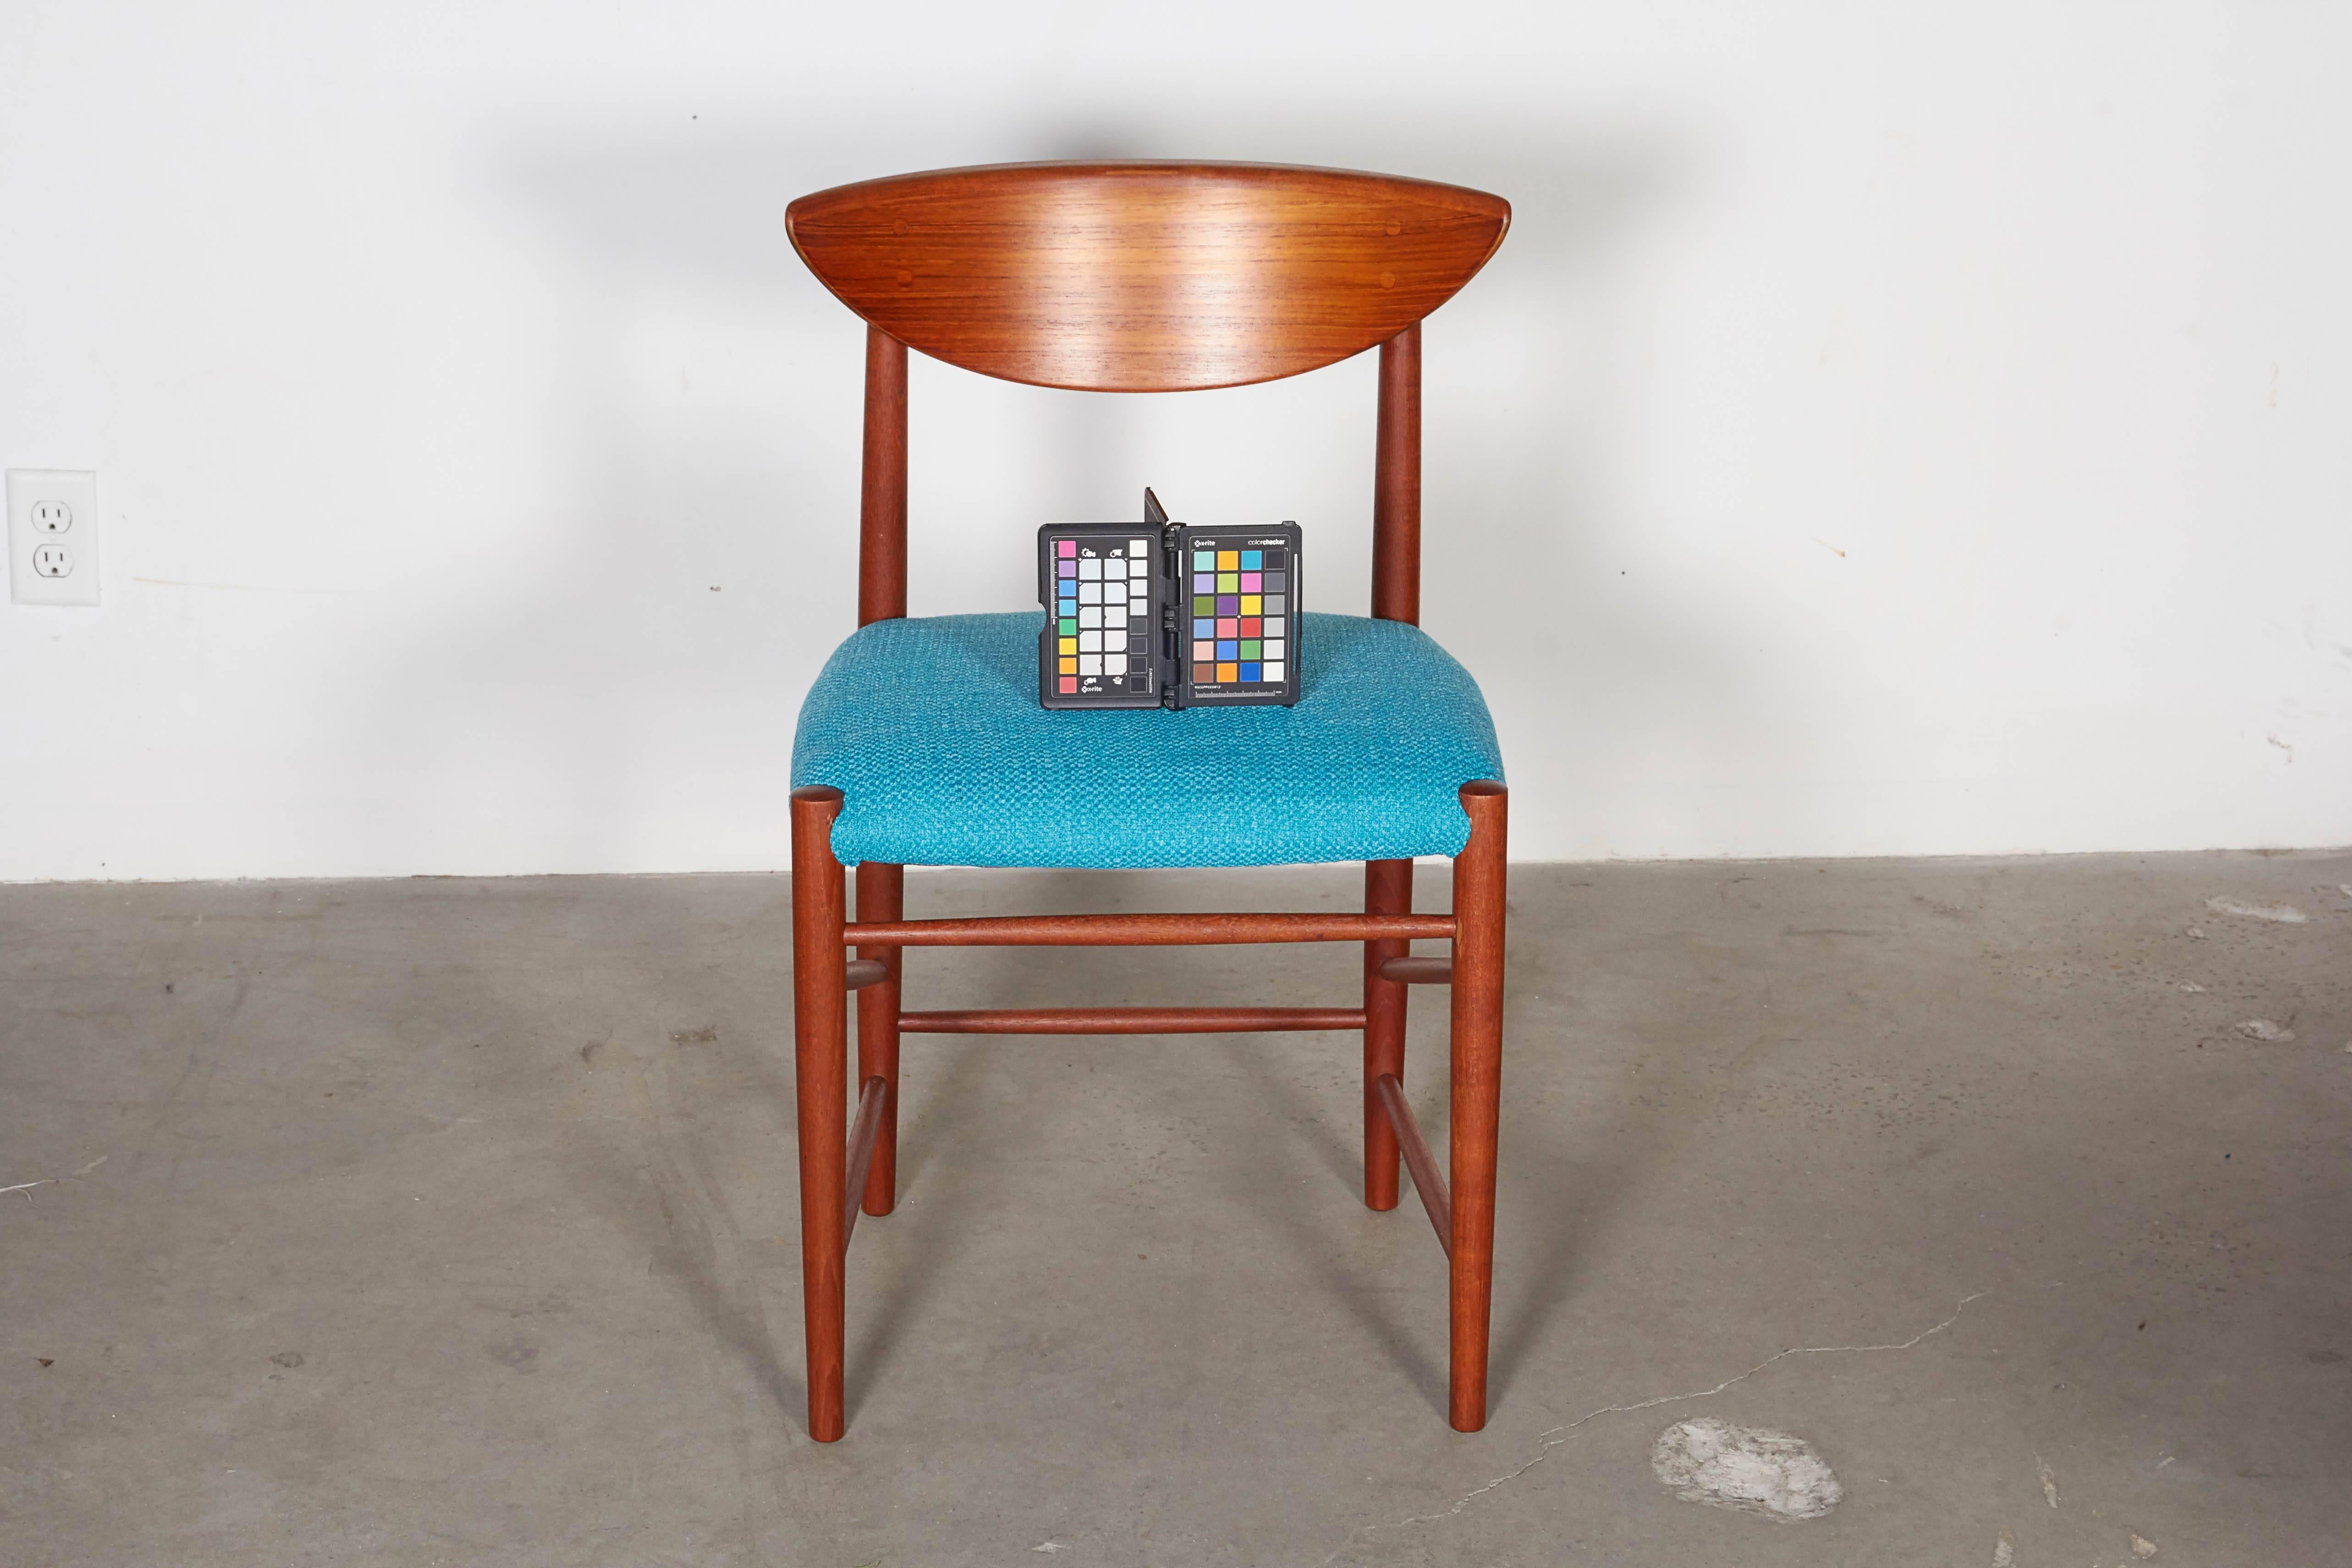 Vintage 1950s Hvidt & Molgaard Teak Dining Chairs

These mid century dining chairs are in excellent condition. Newly upholstered in this re-issued aqua fabric from the 1950s. Ready for pick up, delivery, or shipping anywhere in the world. 